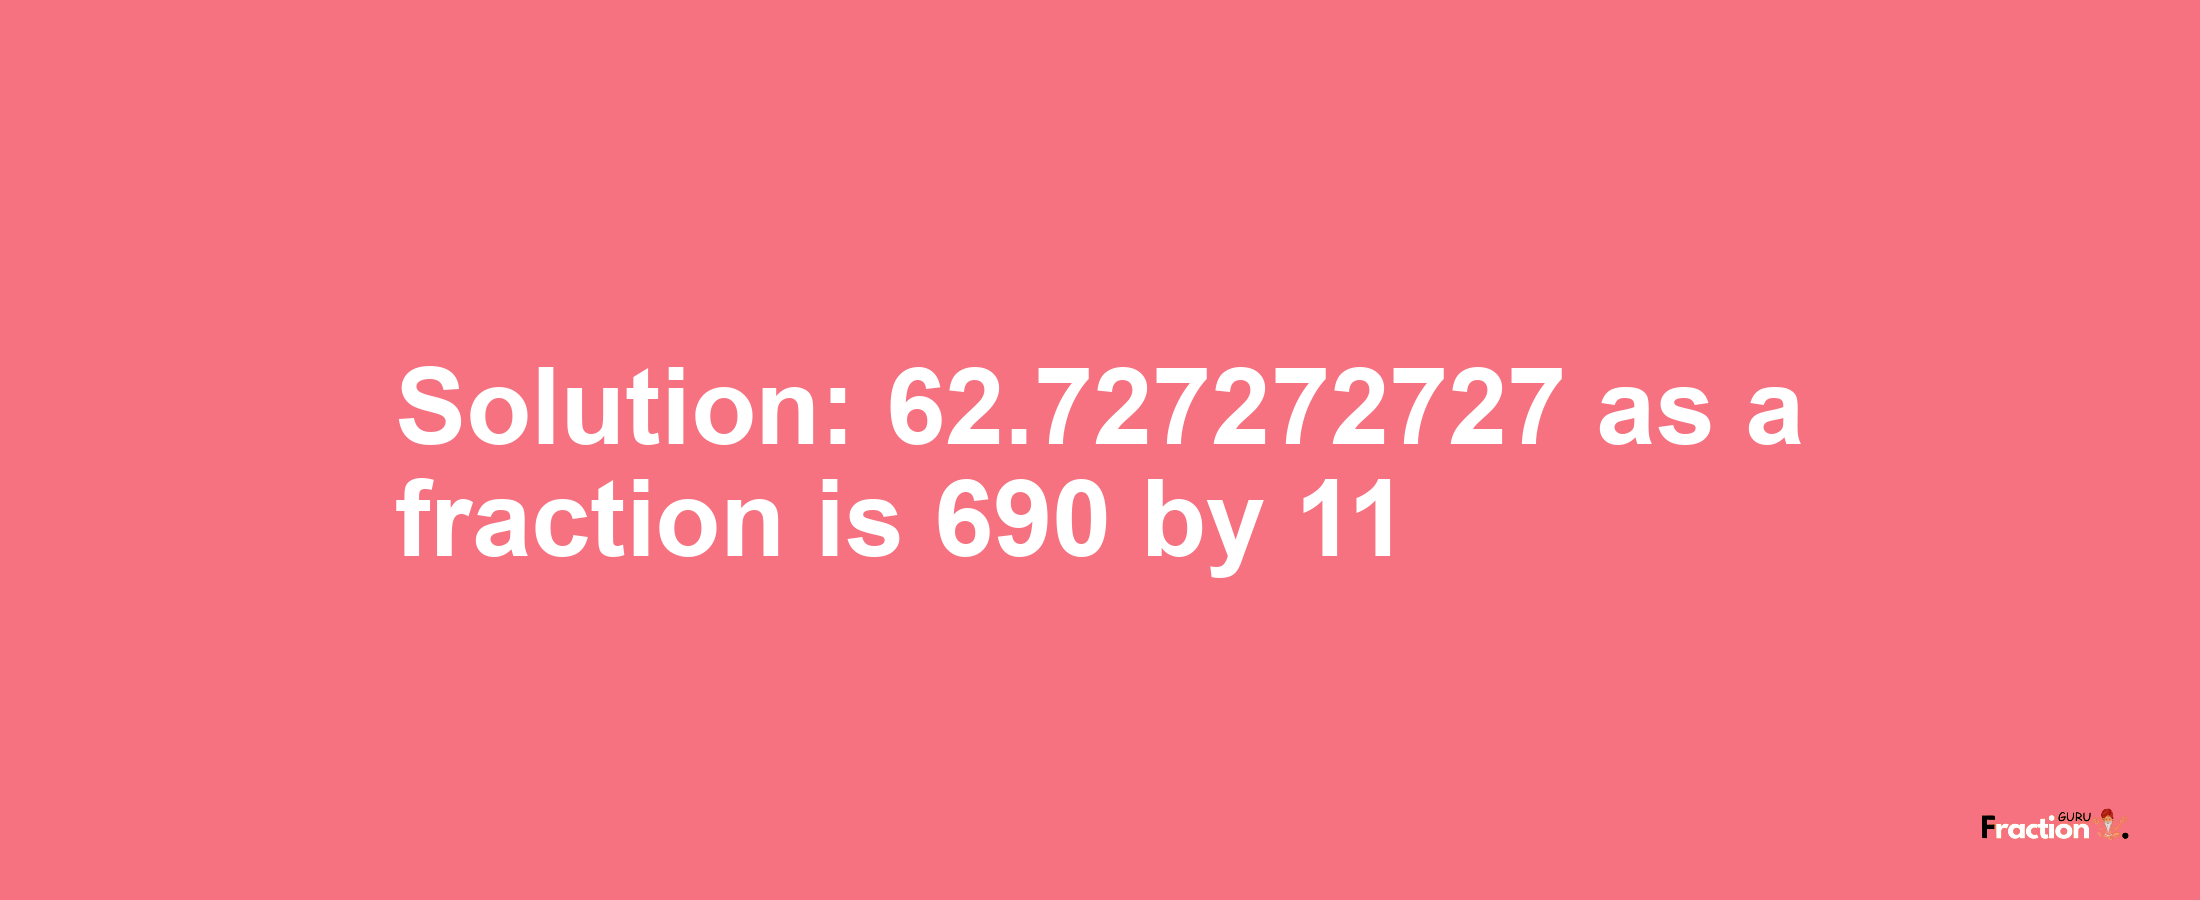 Solution:62.727272727 as a fraction is 690/11